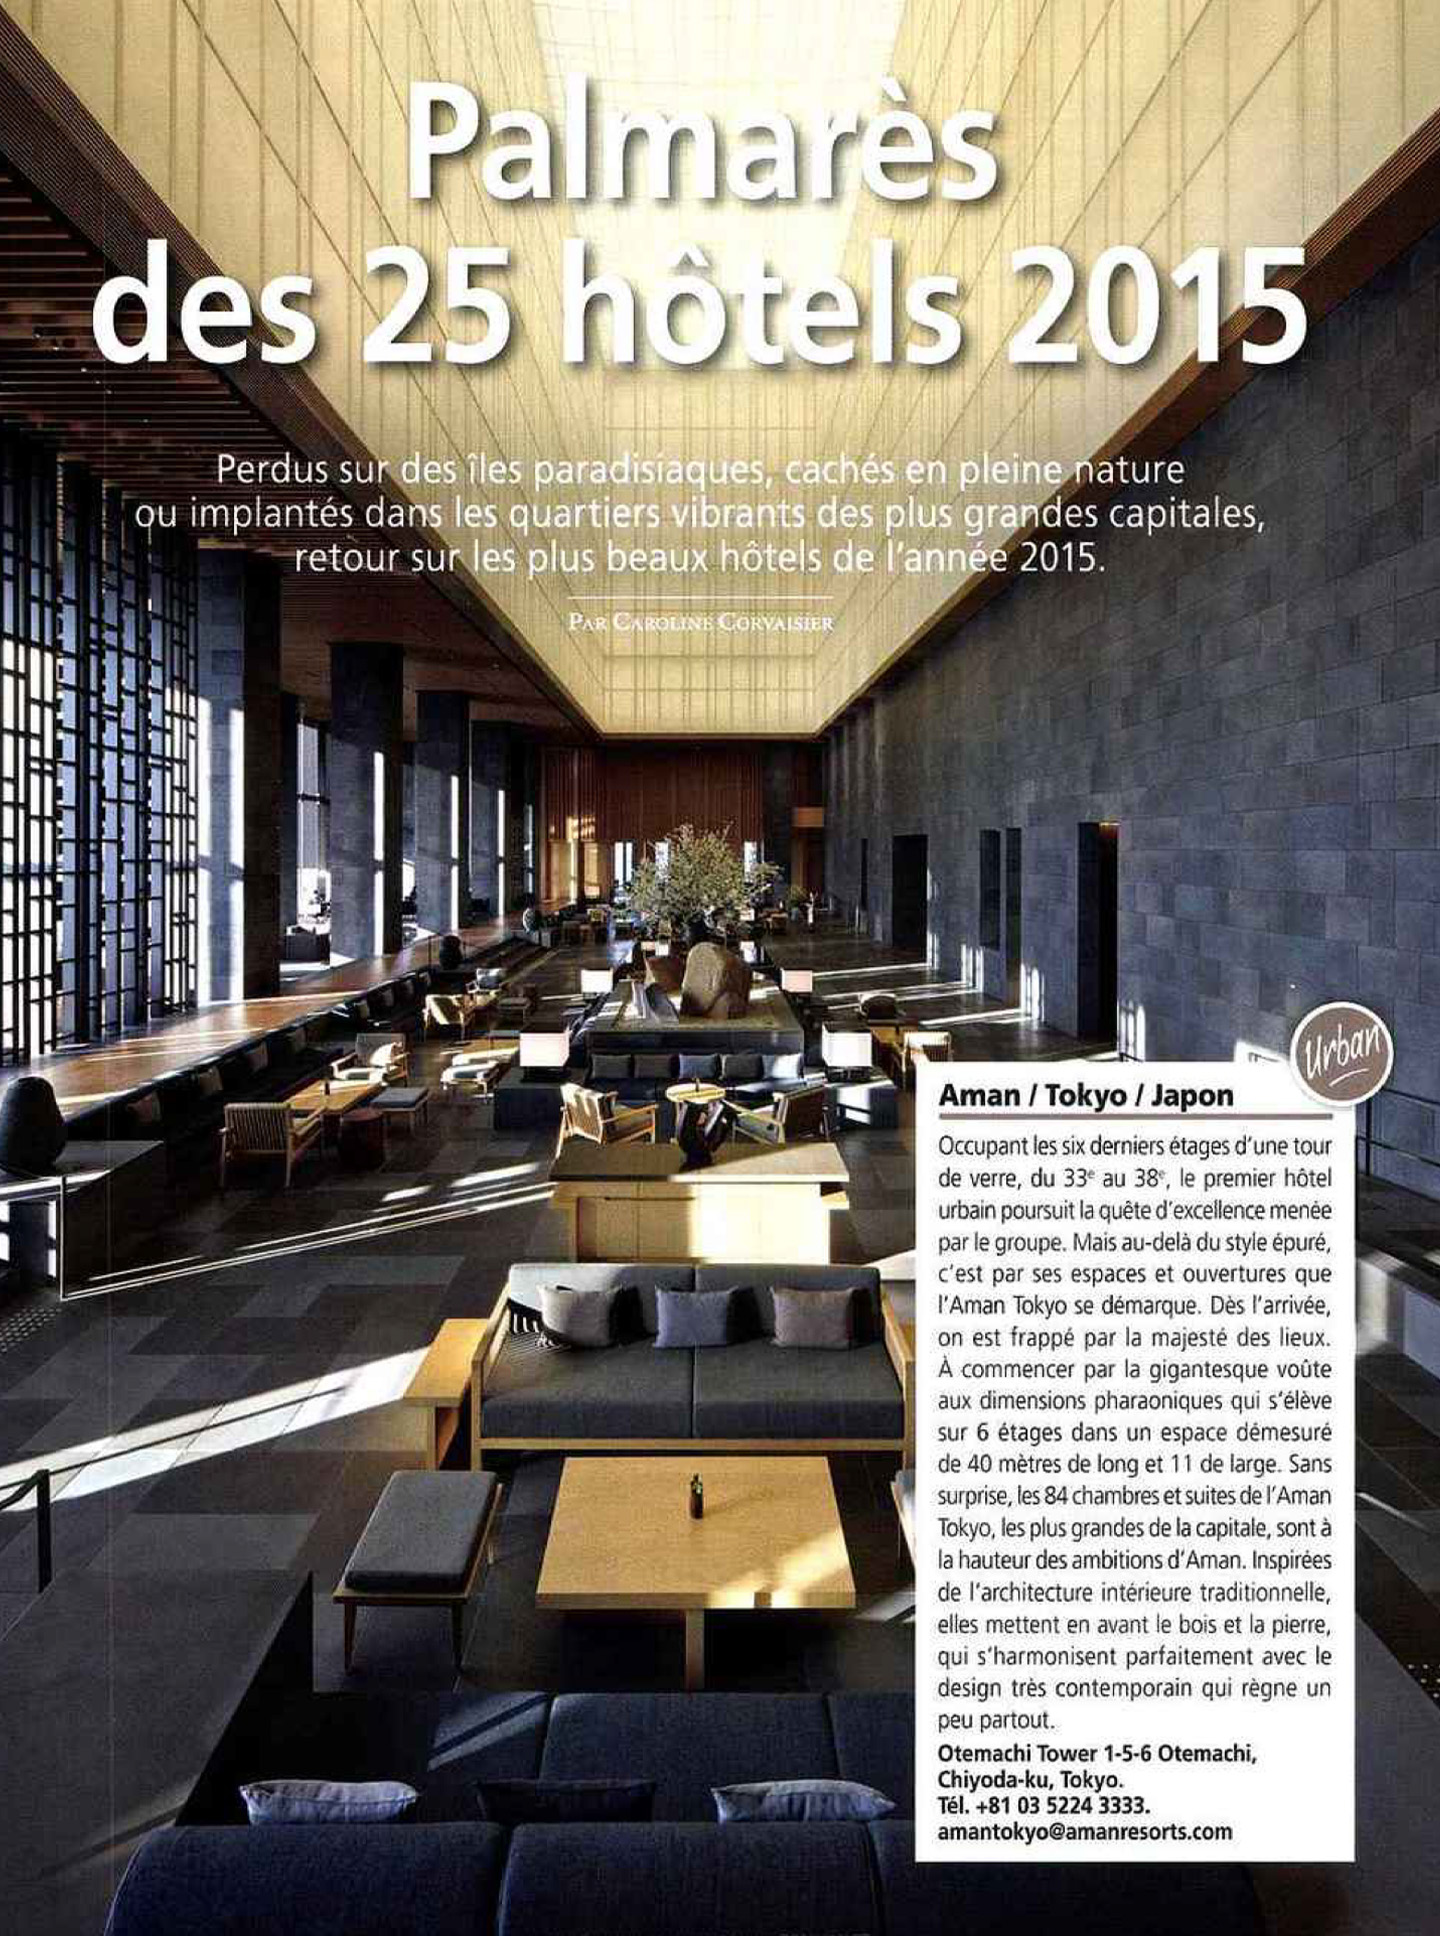 Article on the Cures marines de trouville designed by the interior design studio jean-philippe nuel in the magazine hotel & lodge, luxury hotel and spa